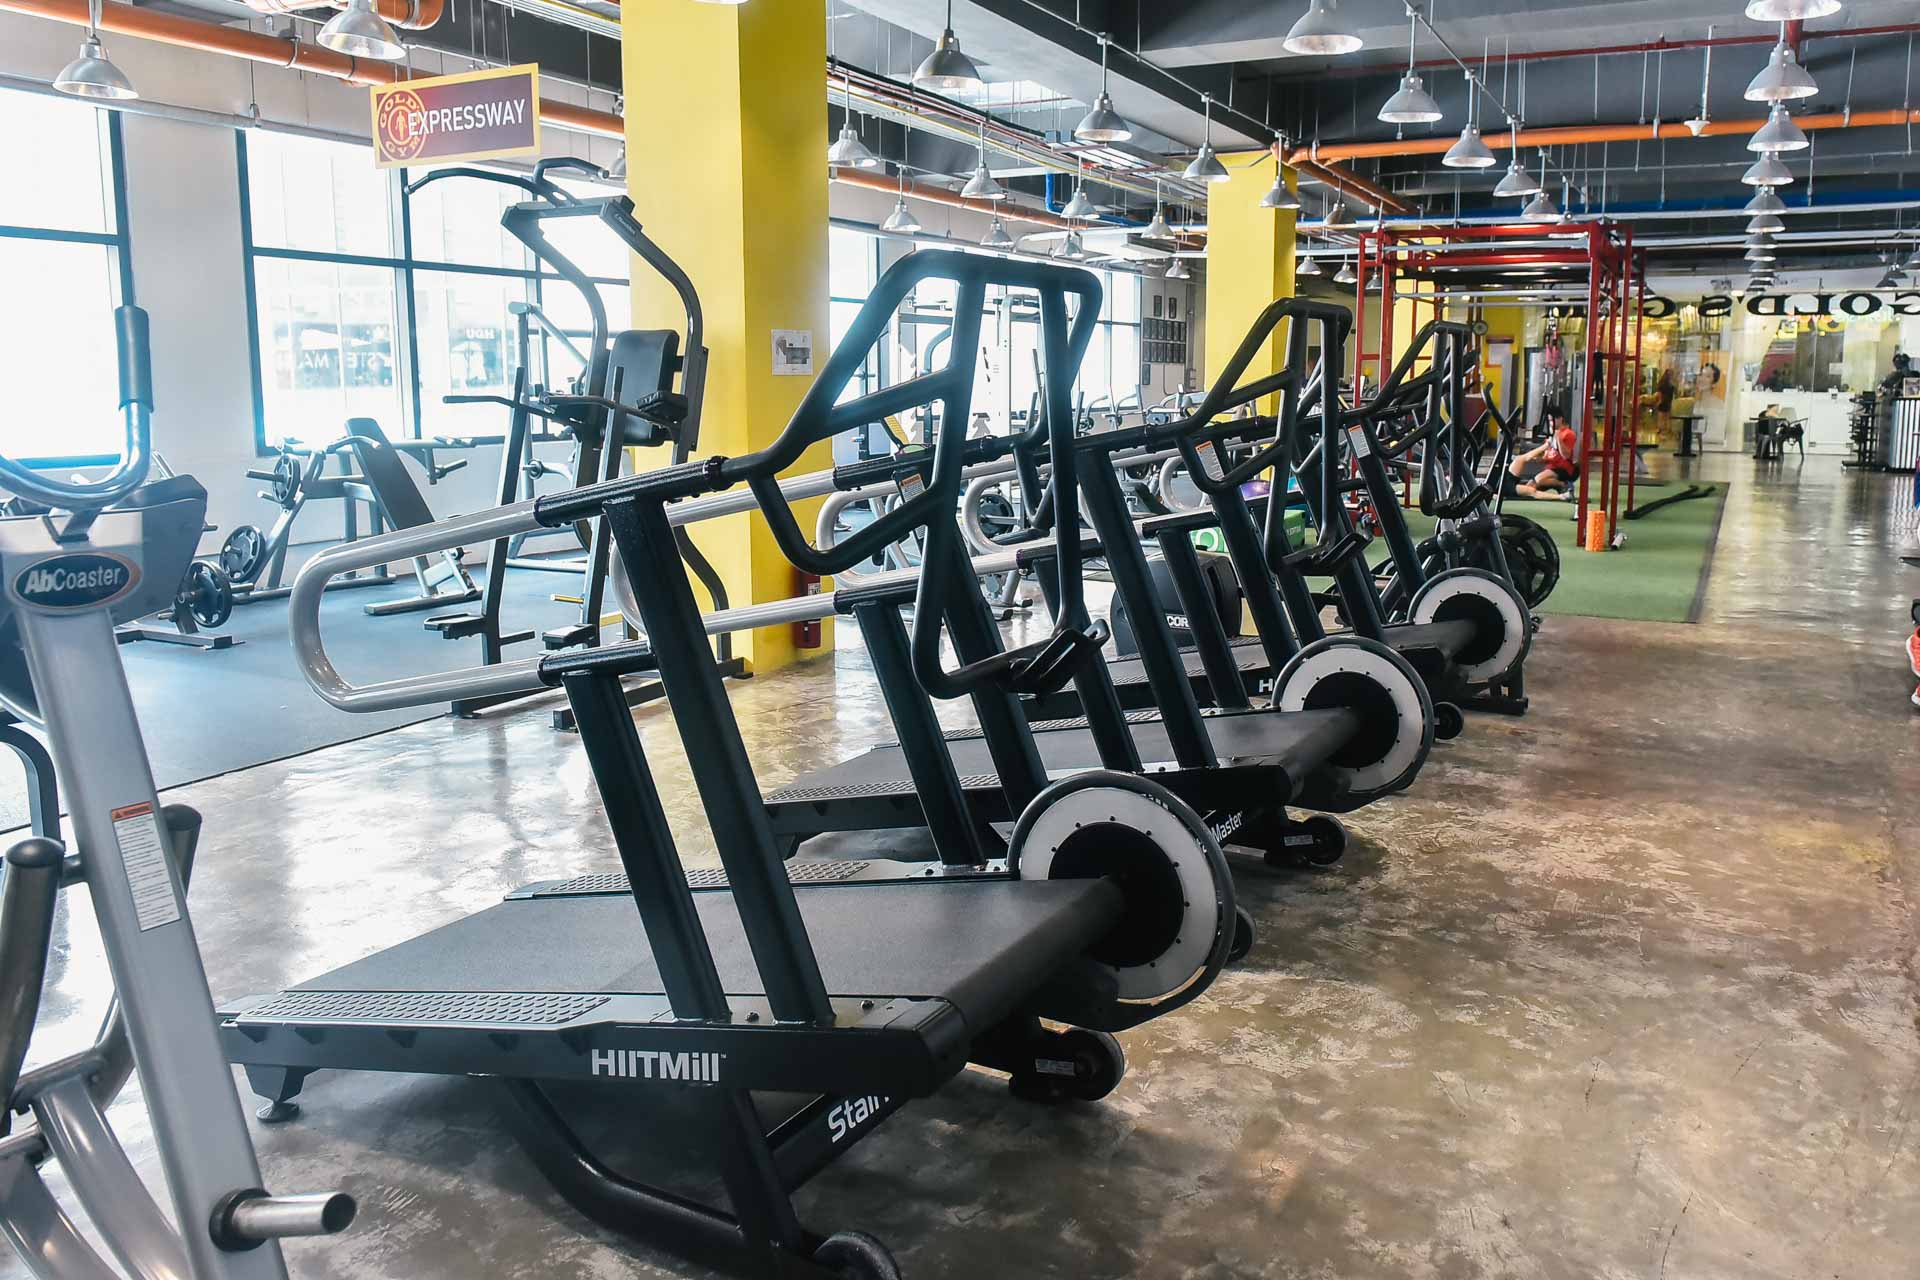 The Best and Most Loved Fitness Gyms in Metro Manila